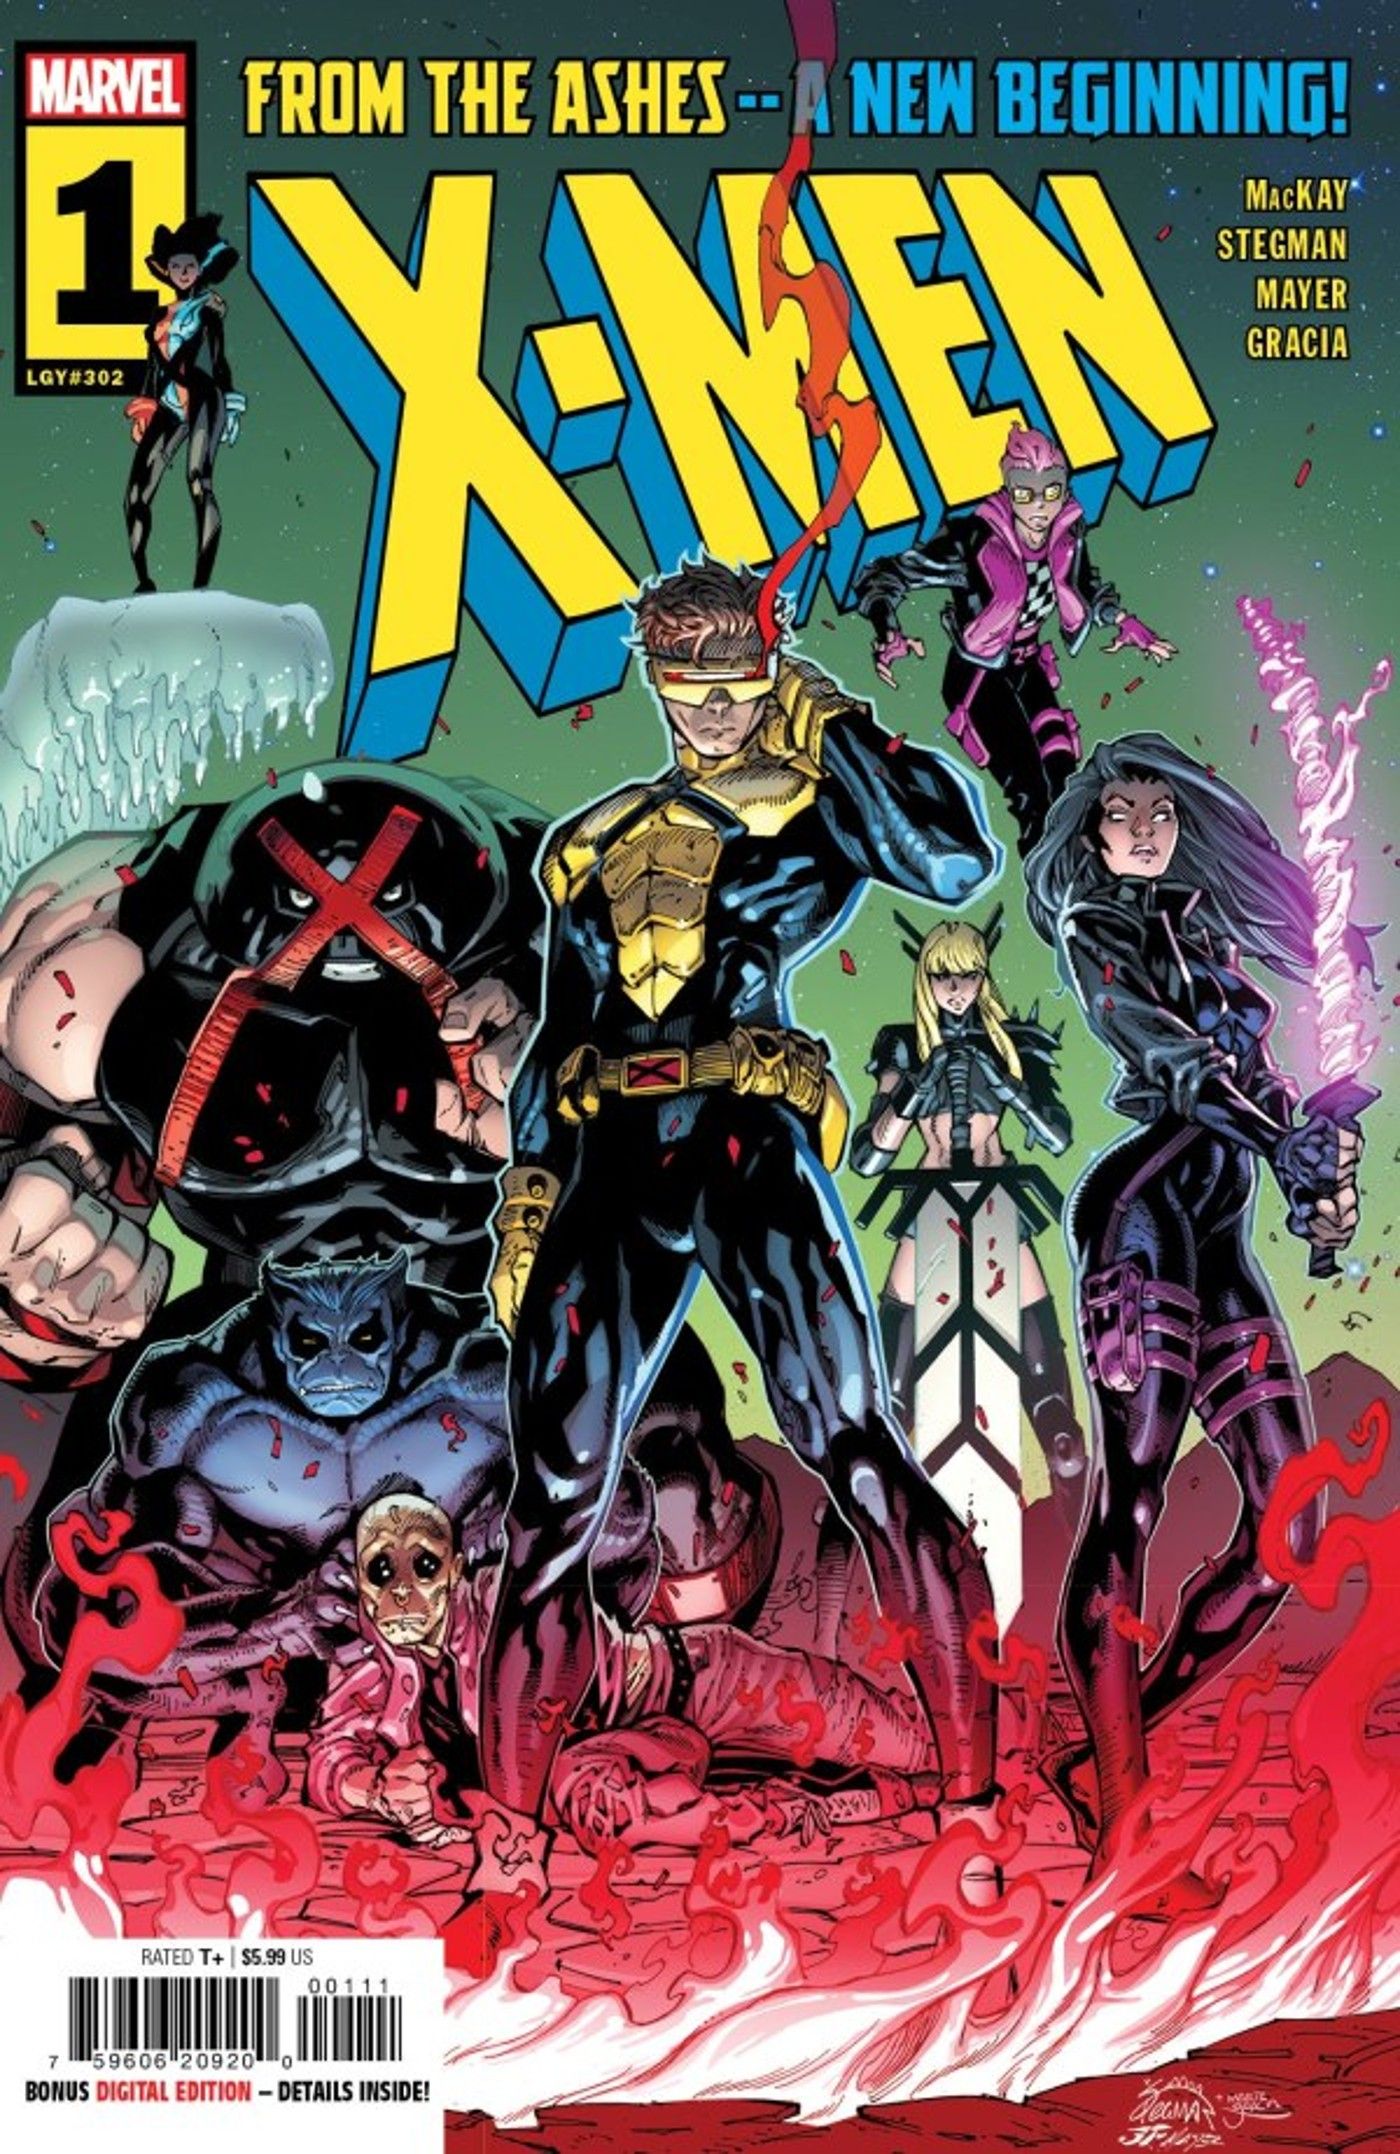 x-men 1 cover new from the ashes era, showing cyclops with his team including beast